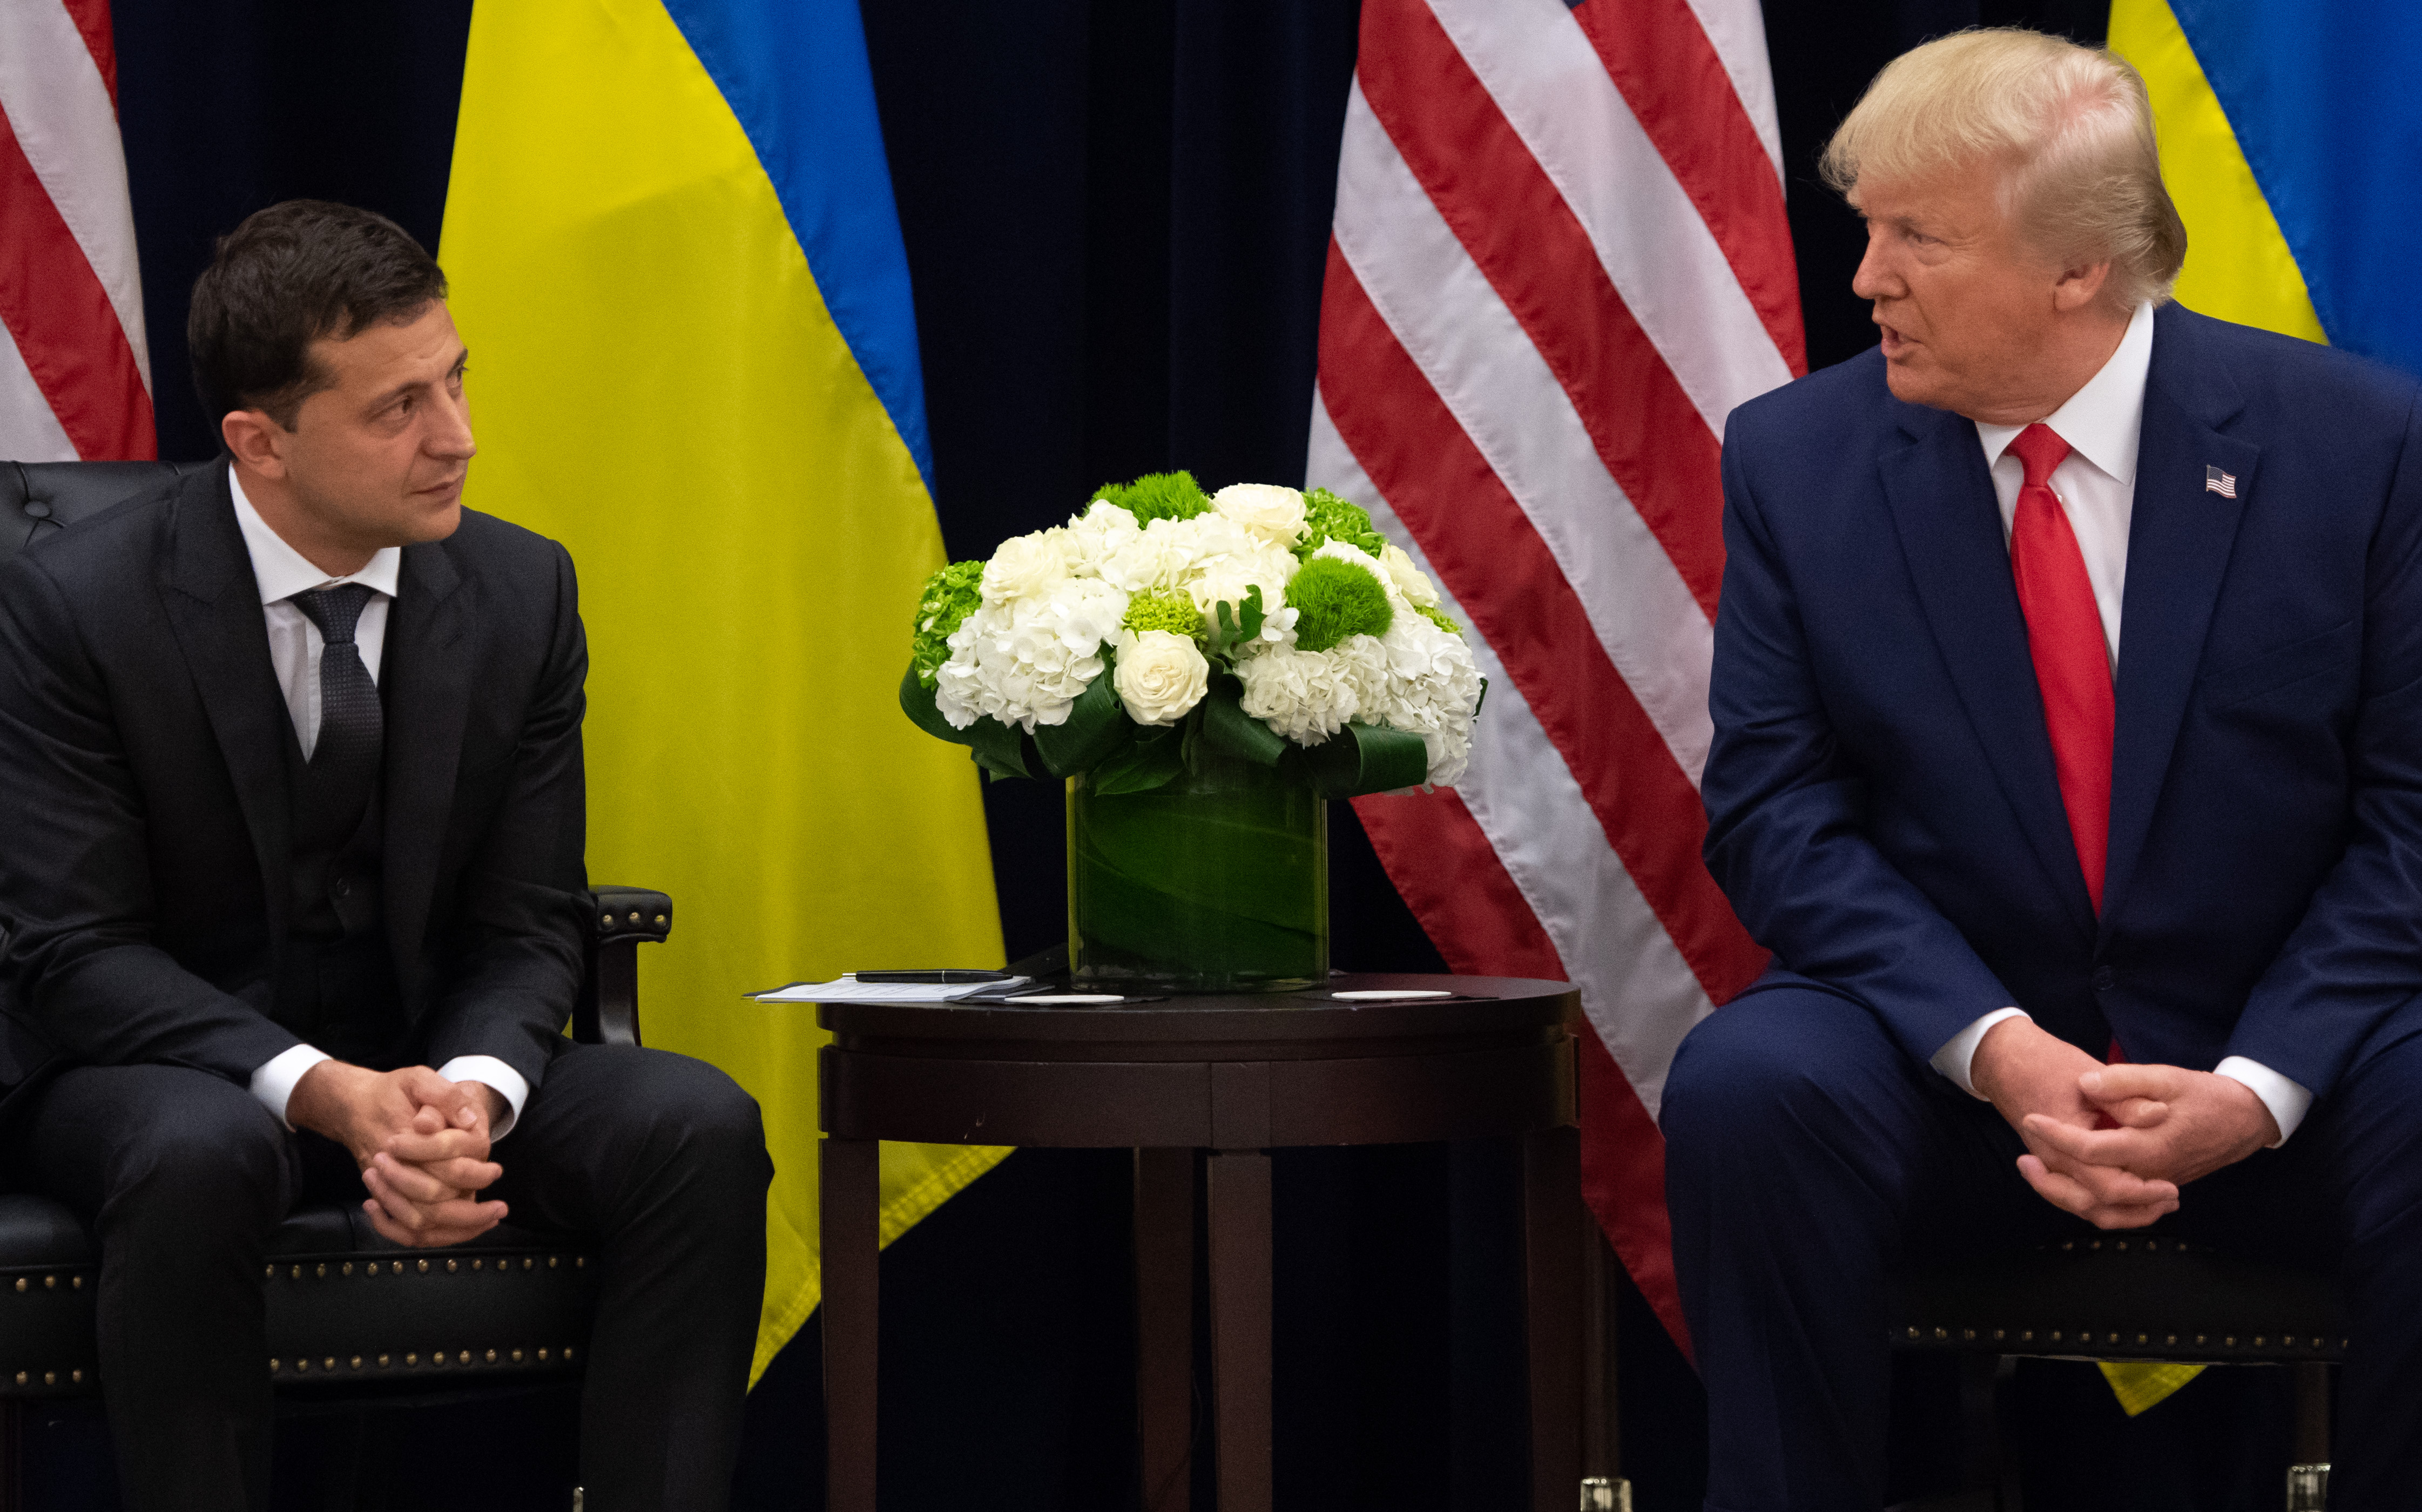 US President Donald Trump and Ukrainian President Volodymyr Zelensky meet in New York on September 25, 2019, on the sidelines of the United Nations General Assembly. (Photo by SAUL LOEB/AFP/Getty Images)